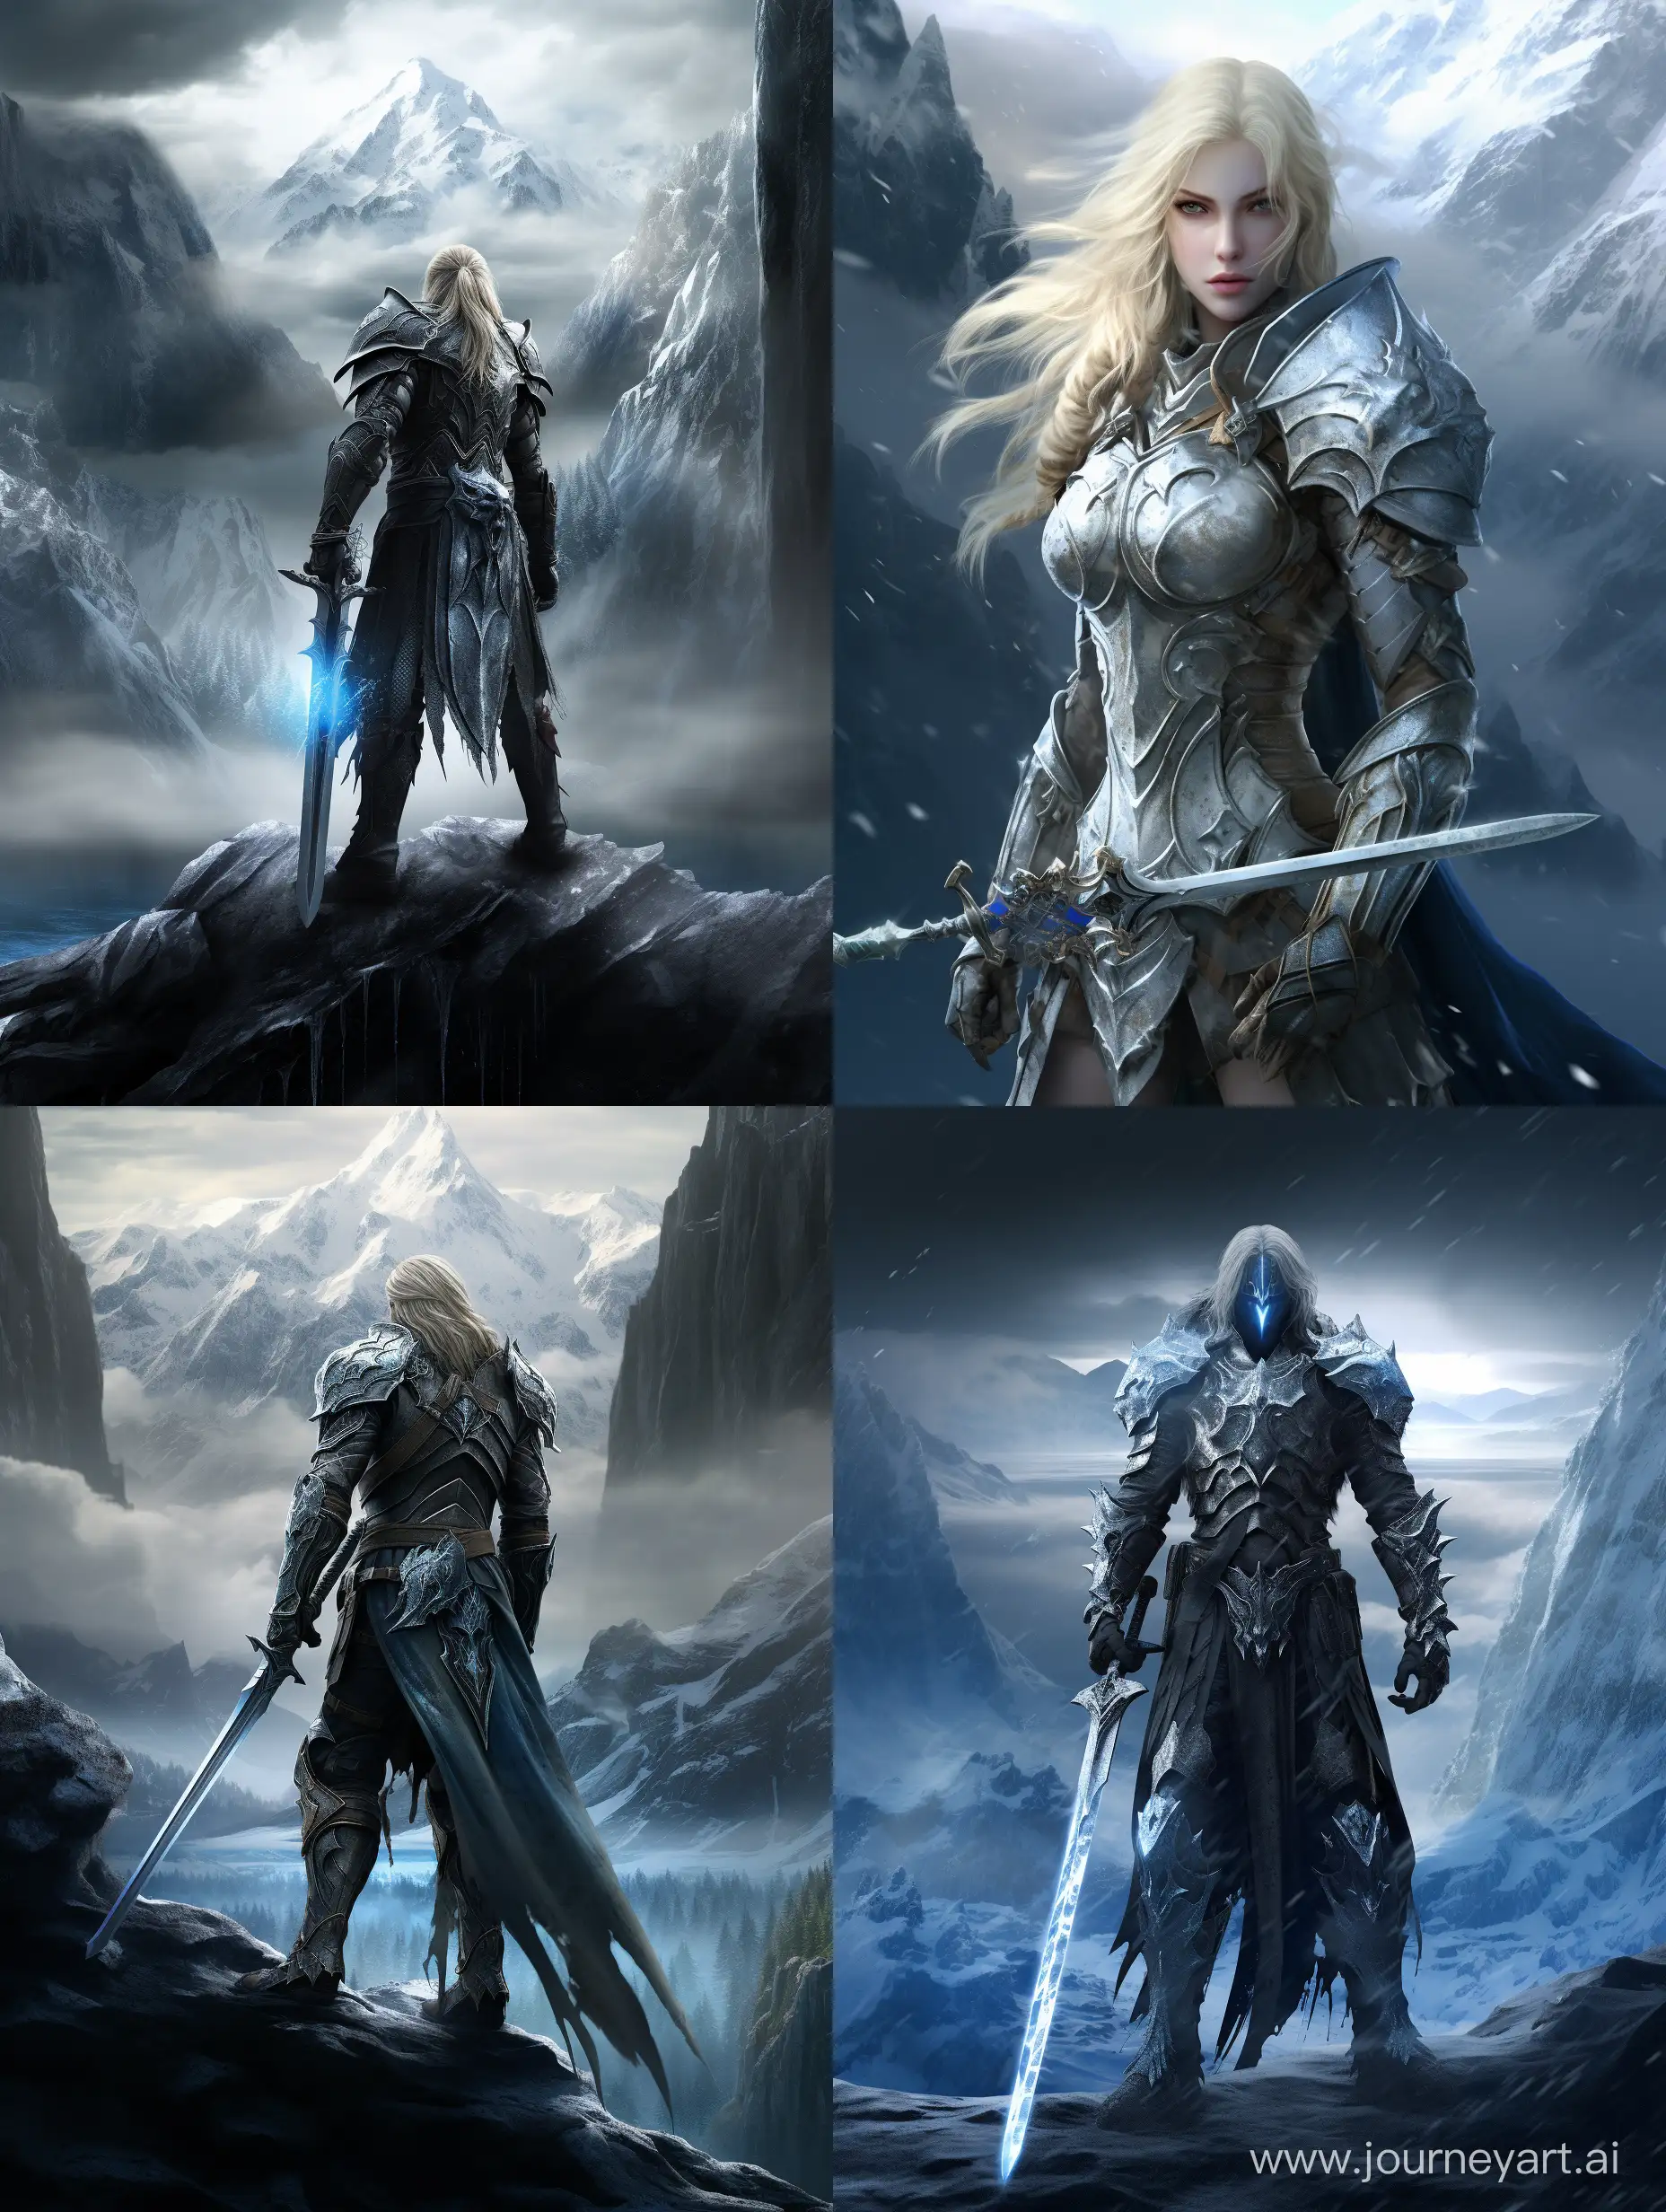 Ultra-realistic full-body depiction of Arthas in a perfect view, showcasing meticulous natural lighting and an epic, atmospheric environment. The character should be rendered by a master of ultra-realistic art using digital painting or illustration as the medium. The style should be detailed and lifelike, capturing Arthas in varied and realistic color schemes. Employ cutting-edge computer graphics to ensure the highest quality and ultra-realistic portrayal of the iconic character.